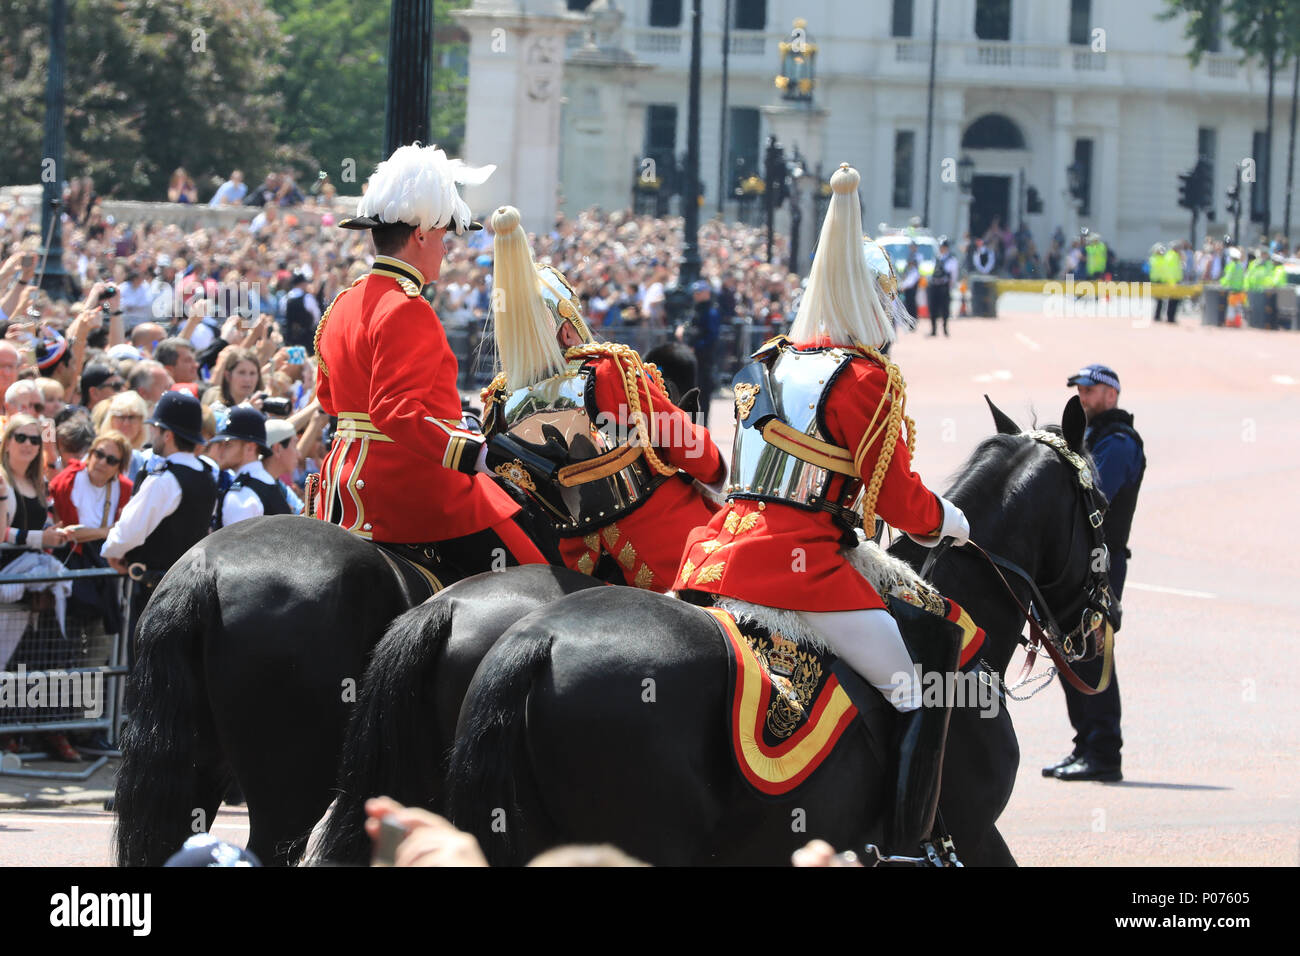 The Mall, London, UK, 9th June 2018. Retired armed forces field marshall and former Chief of Defense staff Lord Guthrie visibly struggles for some time, then eventually collapses and falls off his horse in what may have been a fainting attack during the hot sunshine at Trooping the Colour today. The incident happened in front of Buckingham Palace, the officer was riding in close proximity behind her Majesty the Queen's carriage. Credit: Imageplotter News and Sports/Alamy Live News Stock Photo